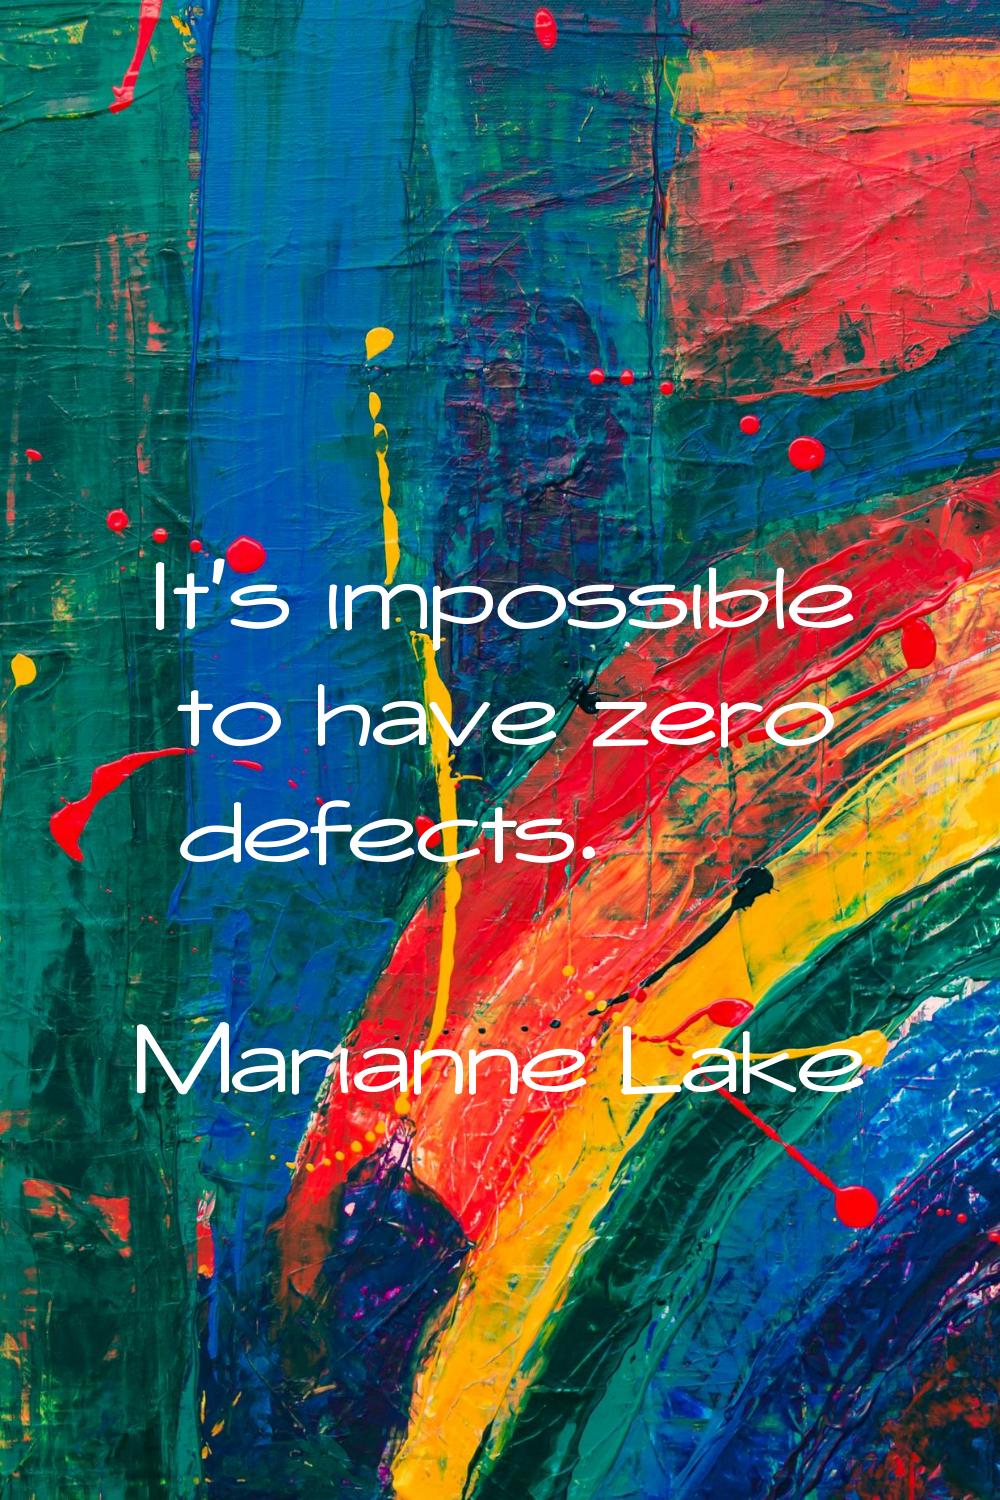 It's impossible to have zero defects.